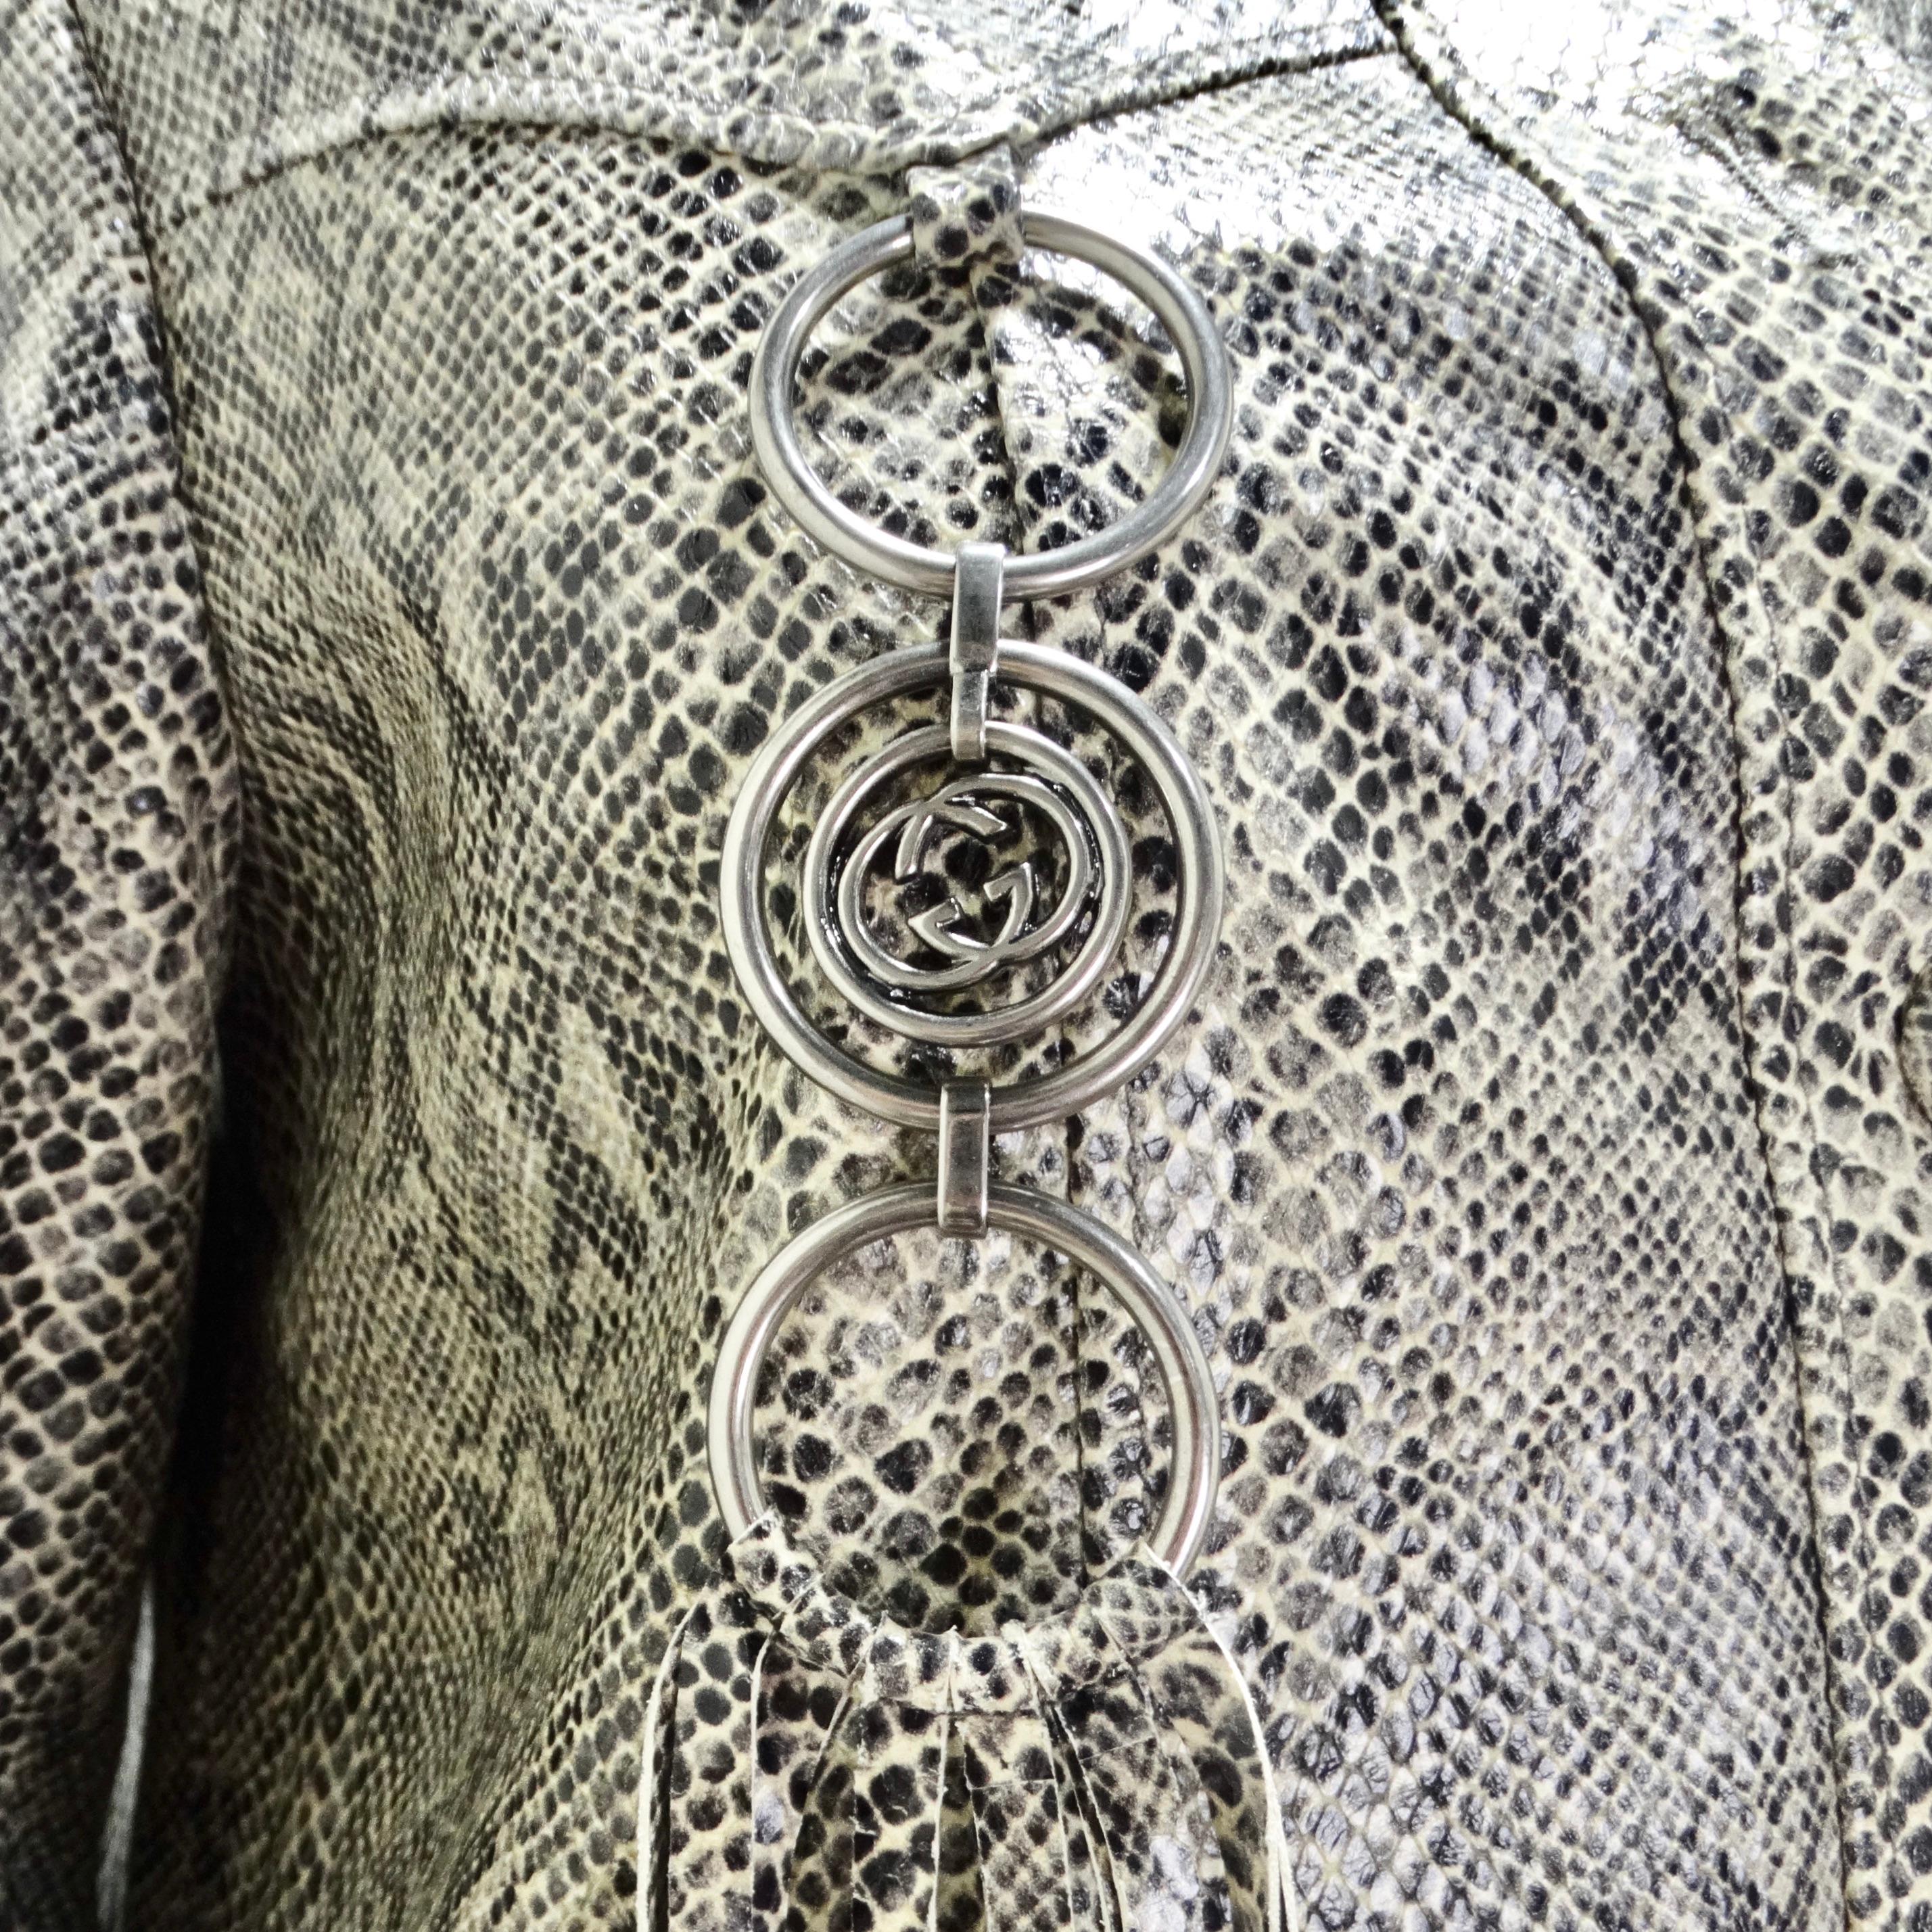 Gucci Fringe Trim Python Print Leather Coat In Excellent Condition For Sale In Scottsdale, AZ